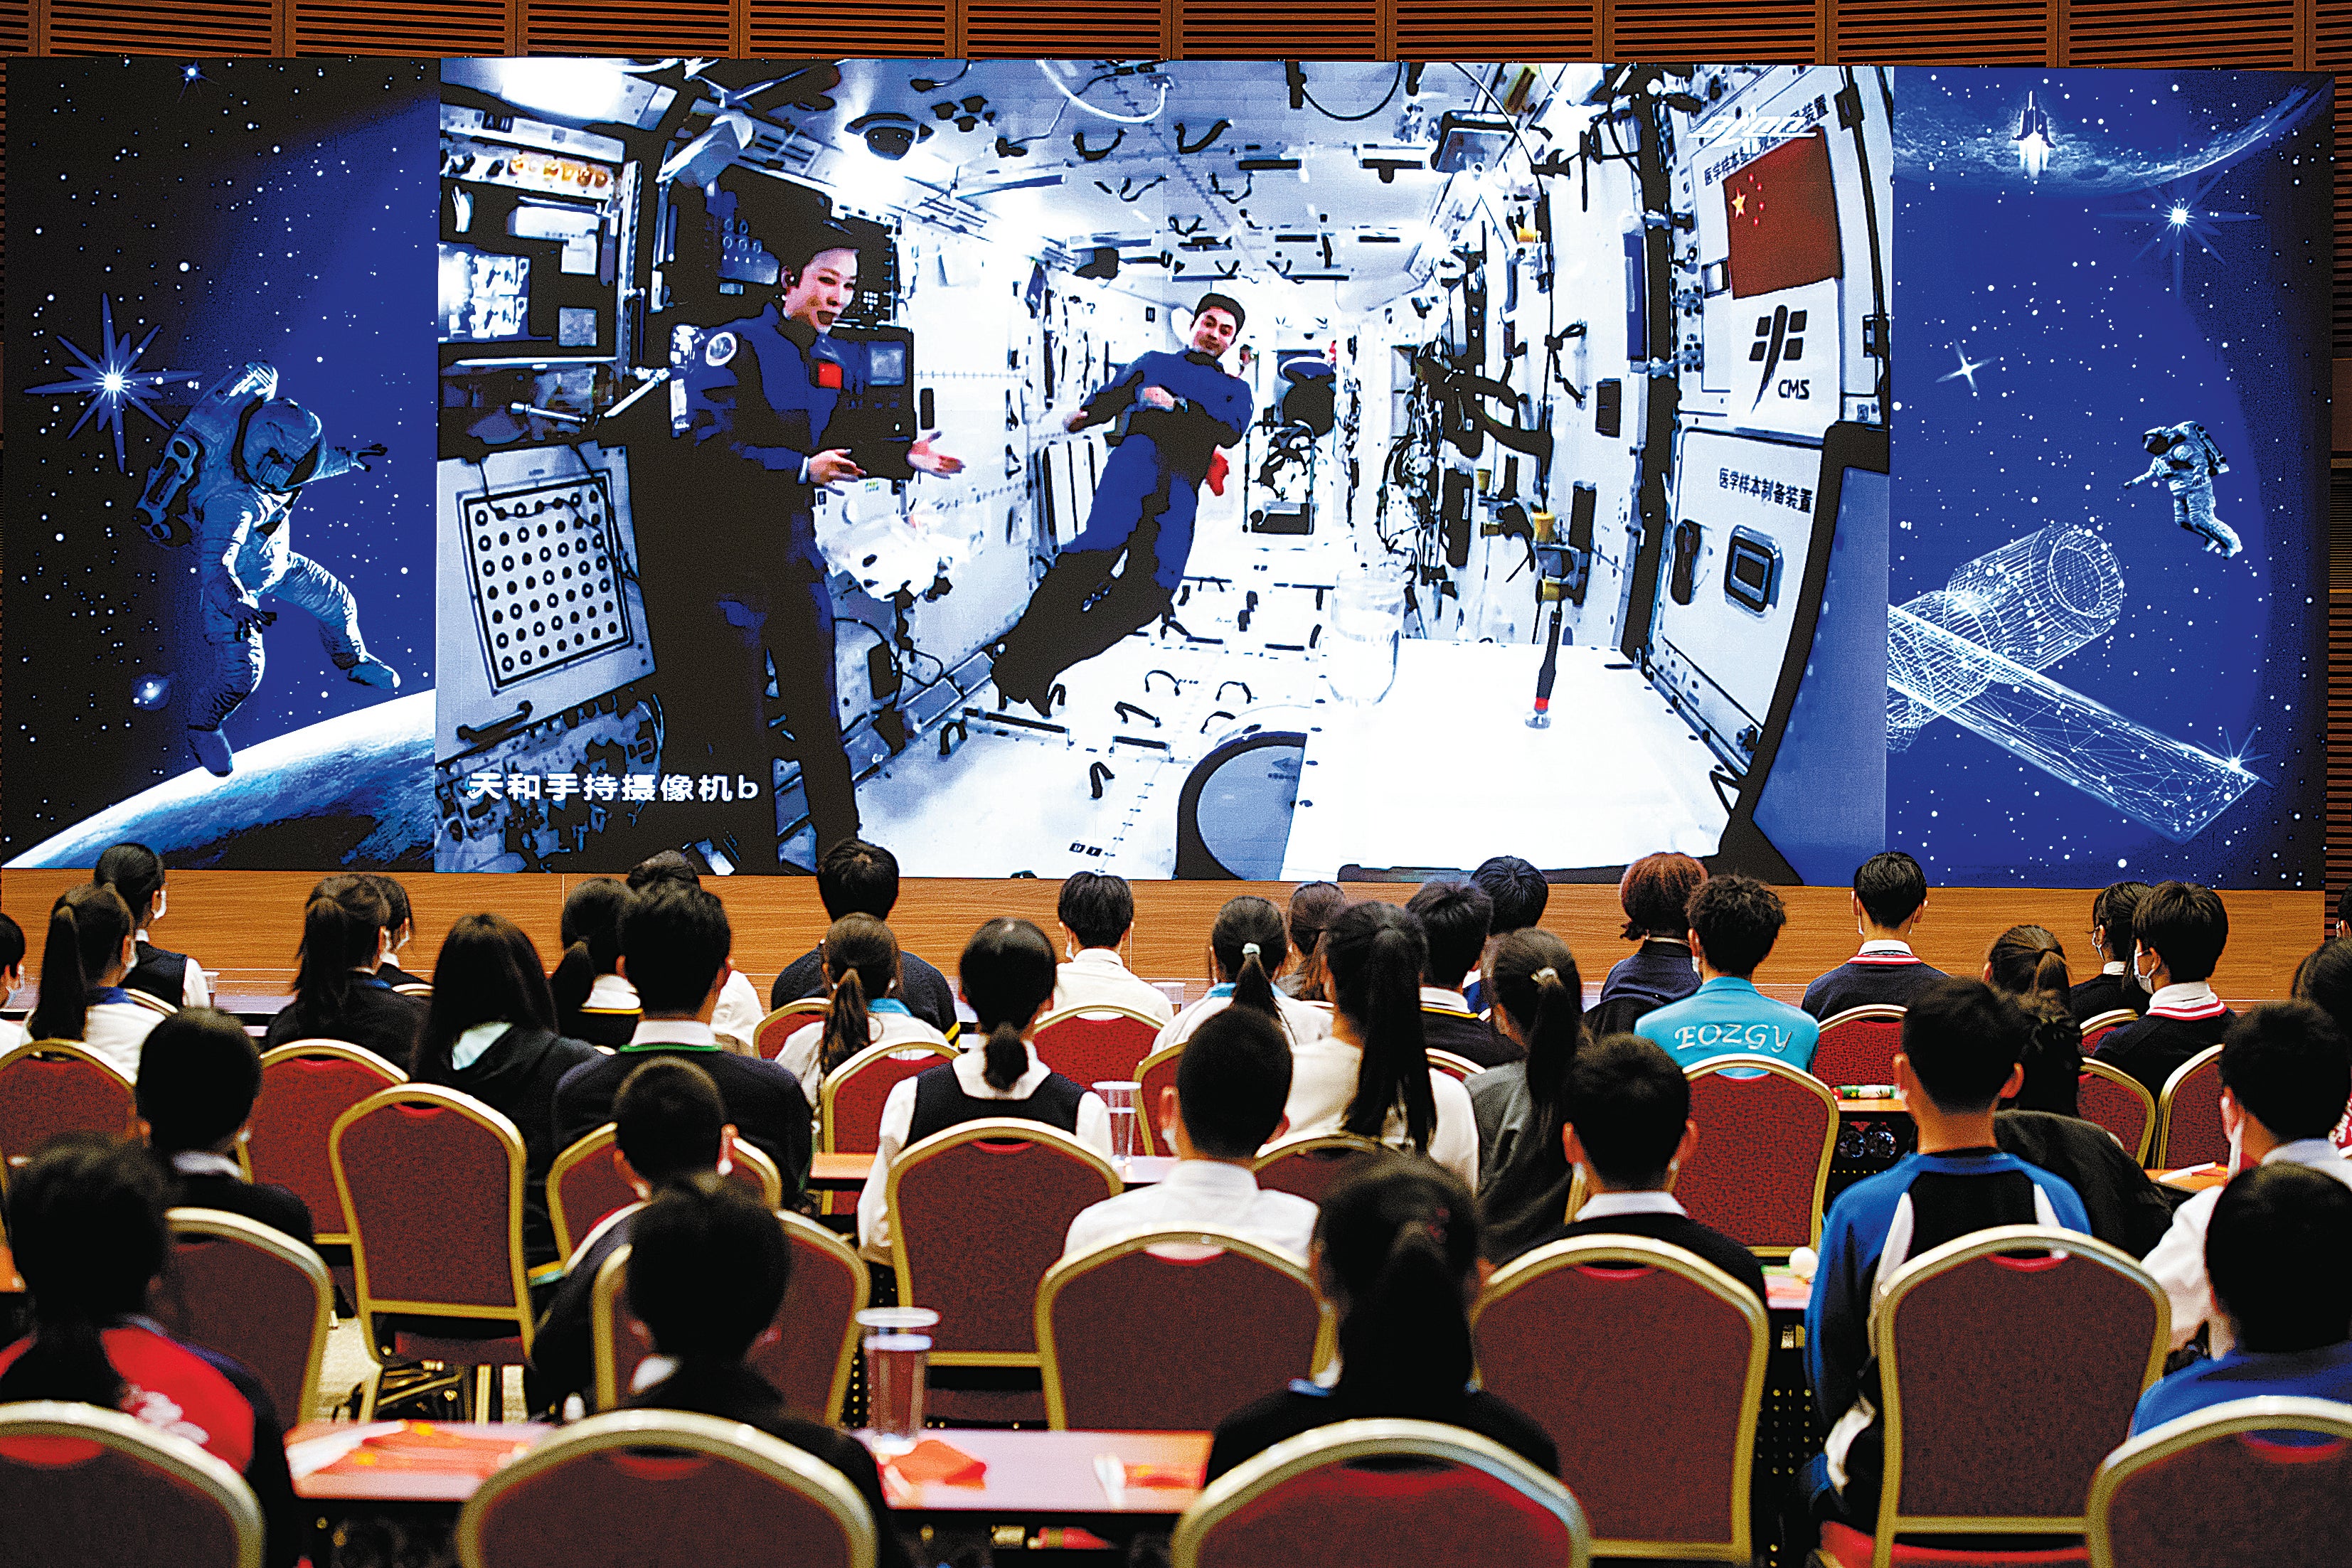 Shenzhou XIII crew members Wang Yaping (left) and Ye Guangfu give a lecture to students from China’s space station on 9 December